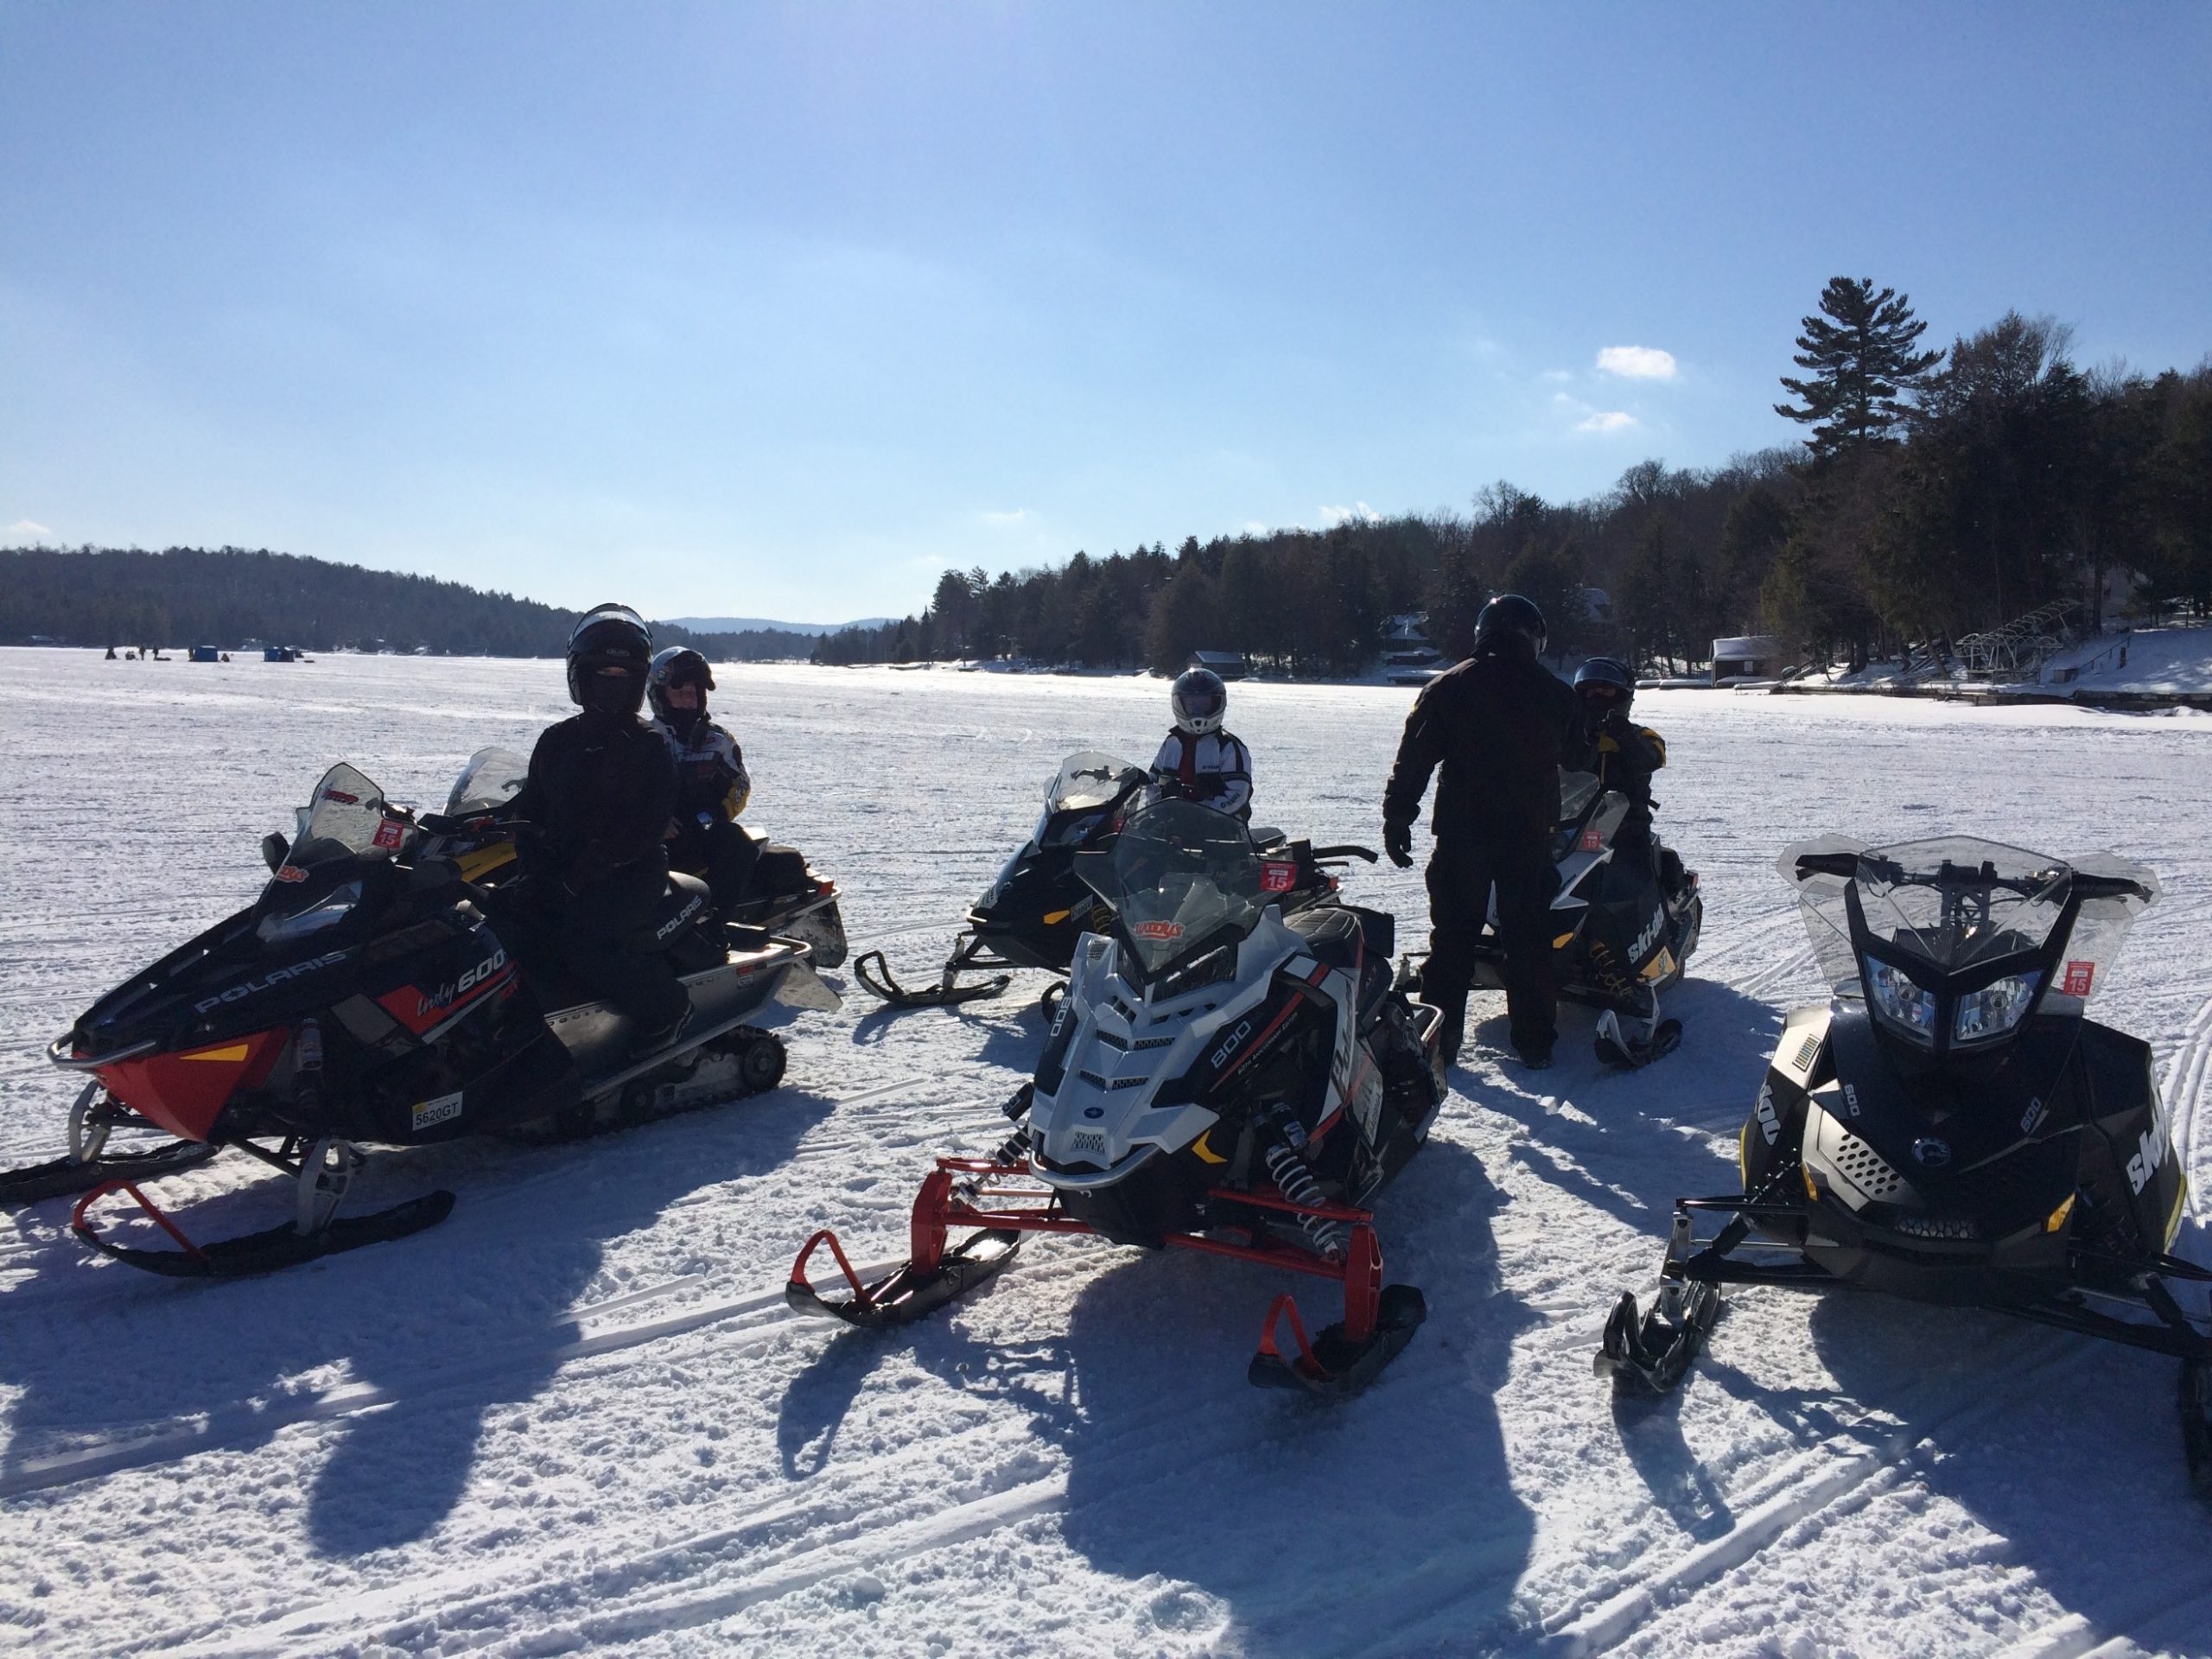 The Best Snowmobile Trails in the Northeast